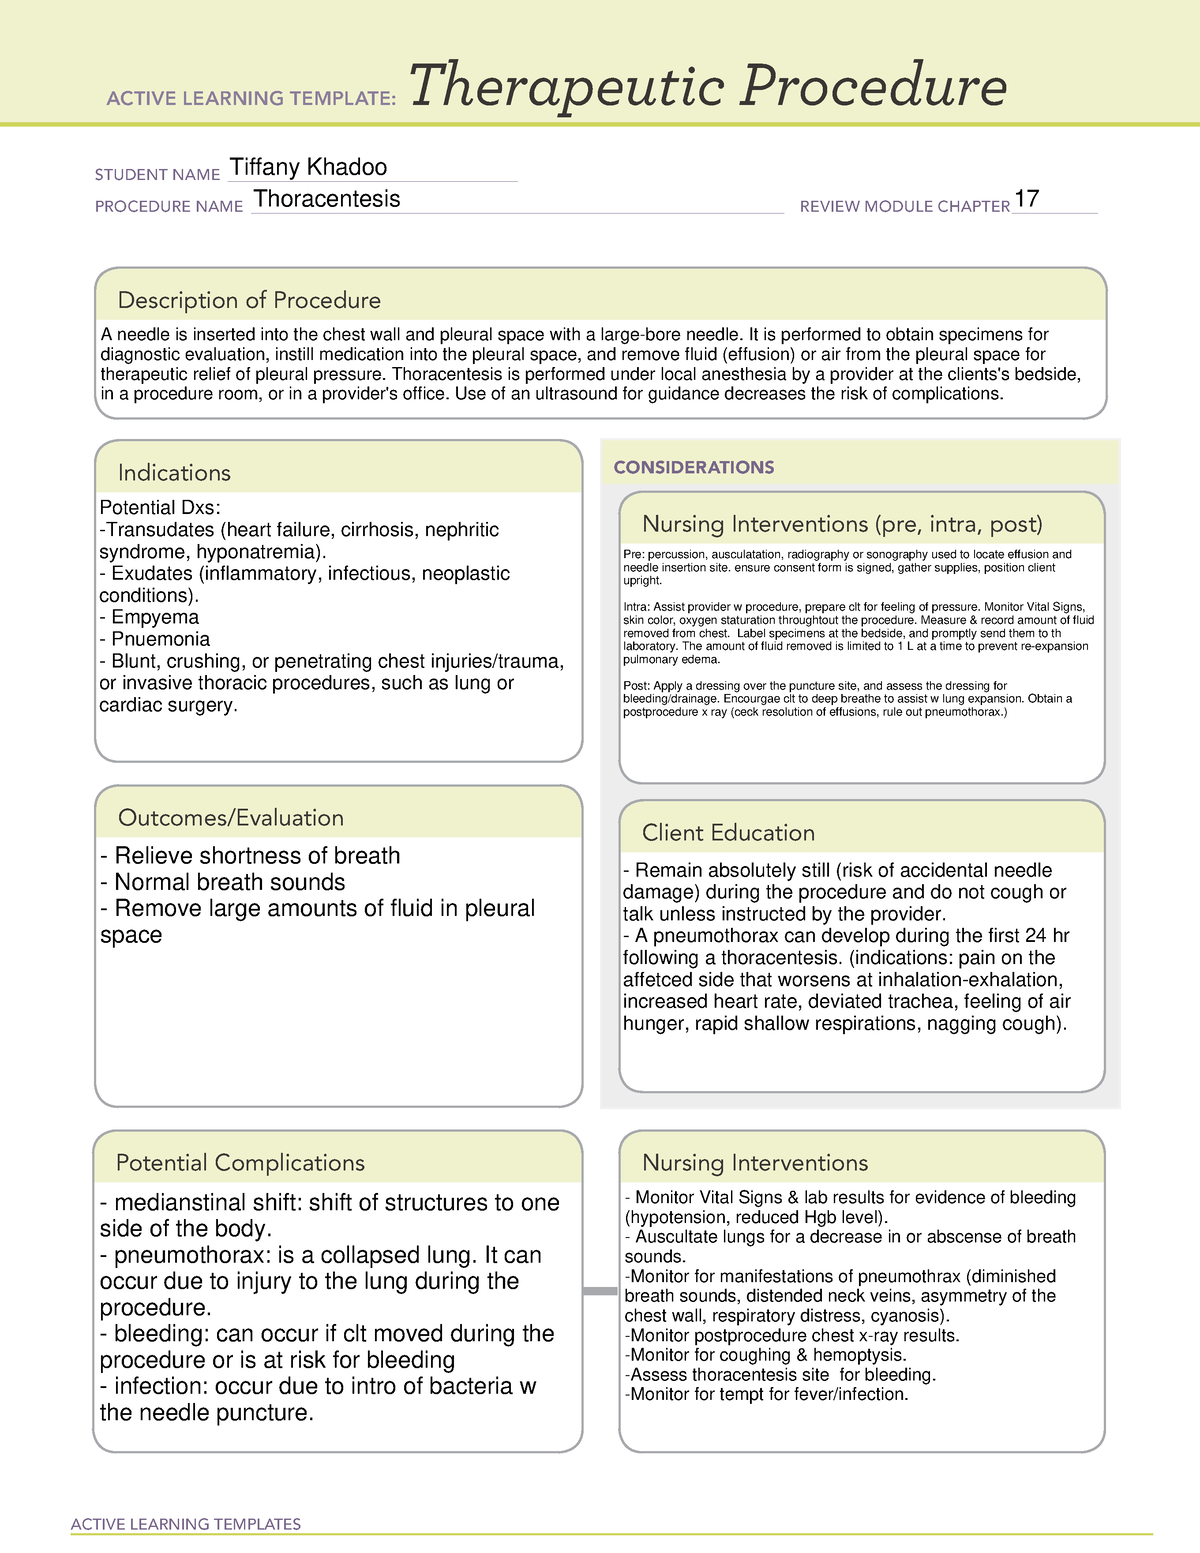 Thoracentesis - Therapeutic Procedure - ACTIVE LEARNING TEMPLATES ...